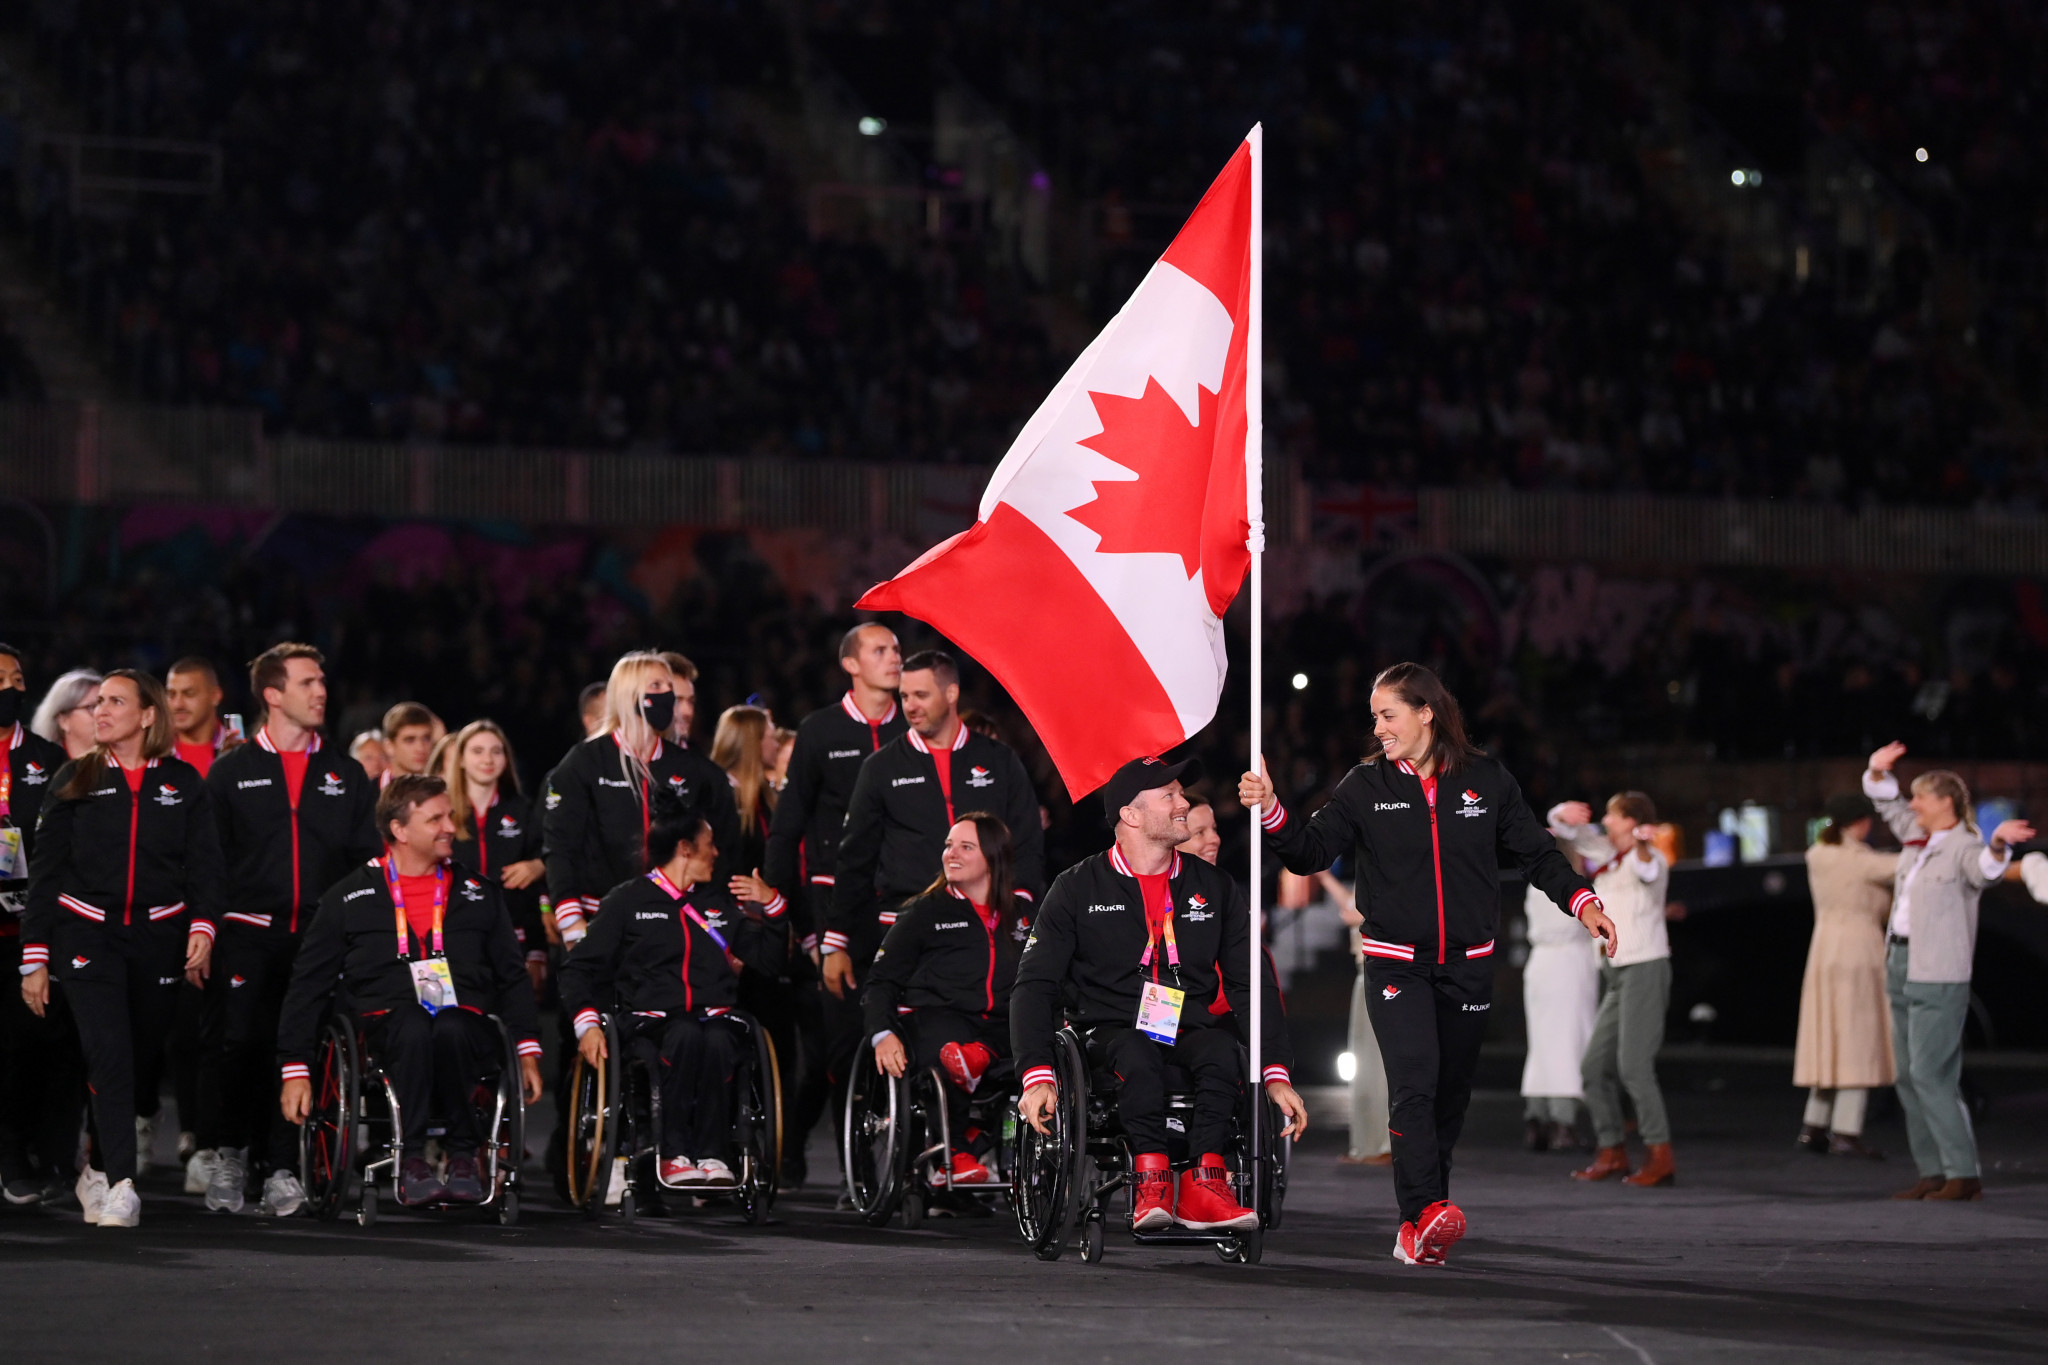 Commonwealth Sport Canada seeks individuals to join its Board